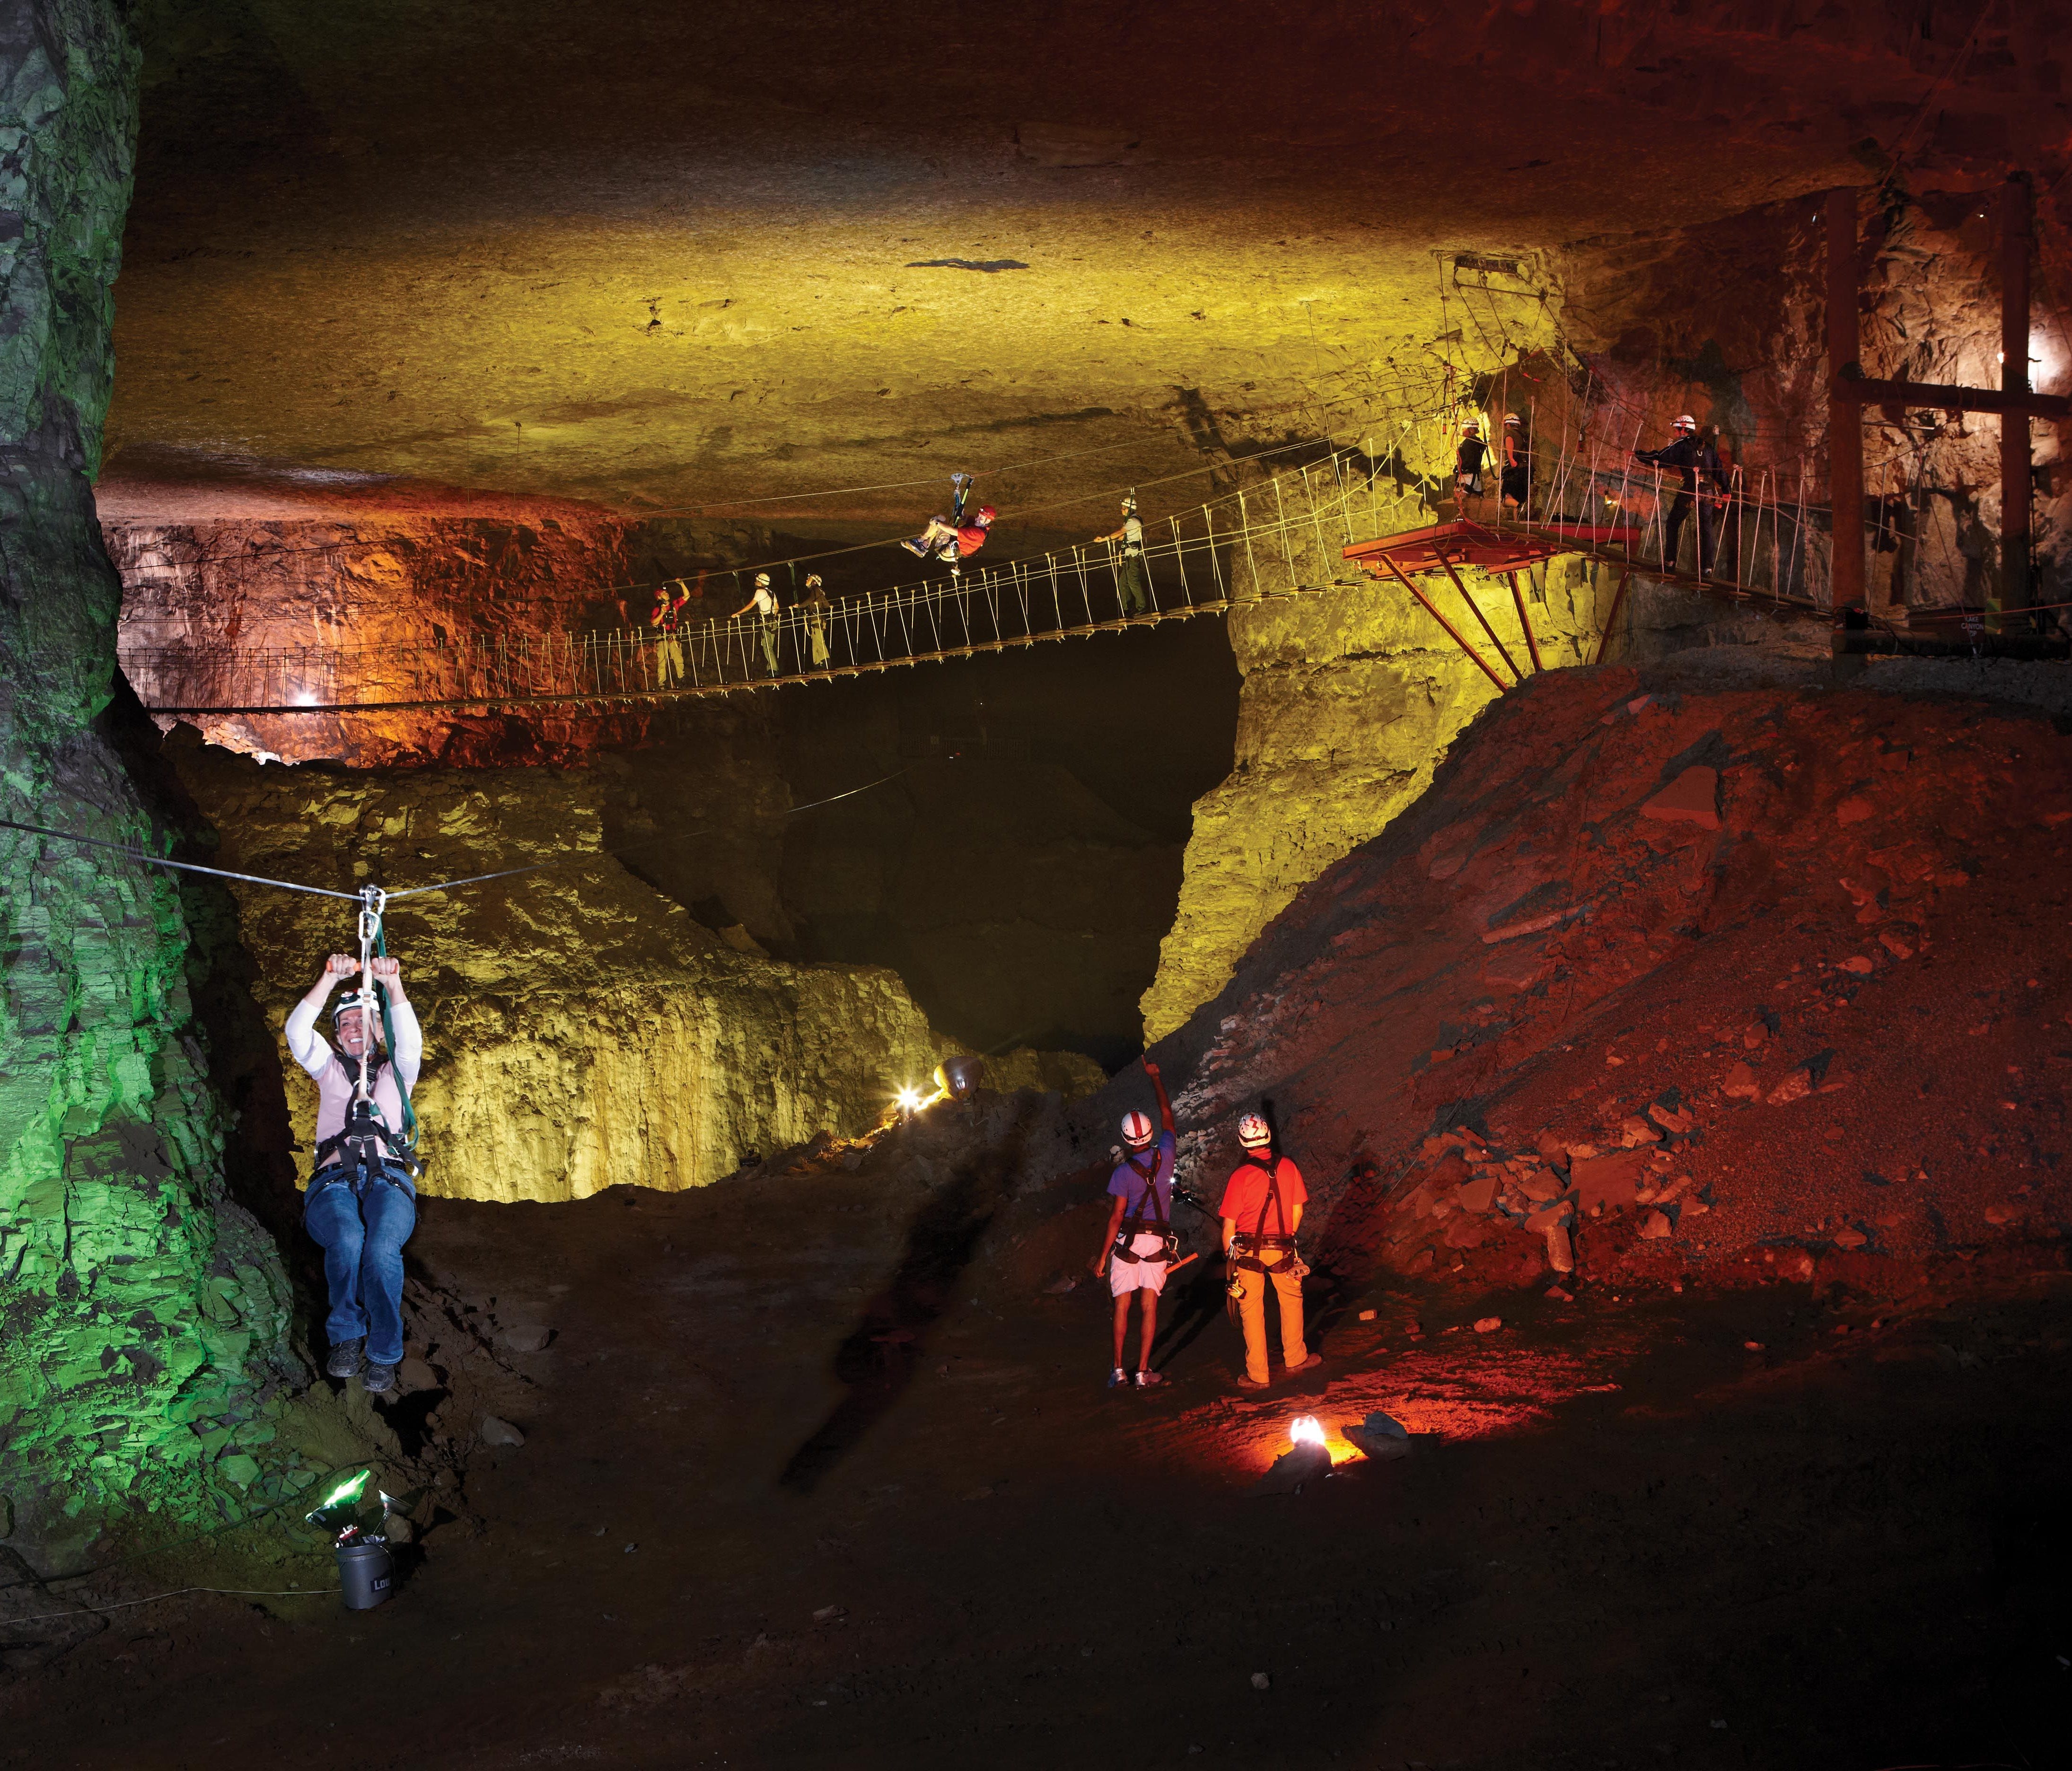 The largest building in Kentucky is the aptly named Louisville Mega Cavern, a former limestone mine that has reinvented itself as a recreation, touring, office and storage center, with a zipline, tours and a mountain bike park.